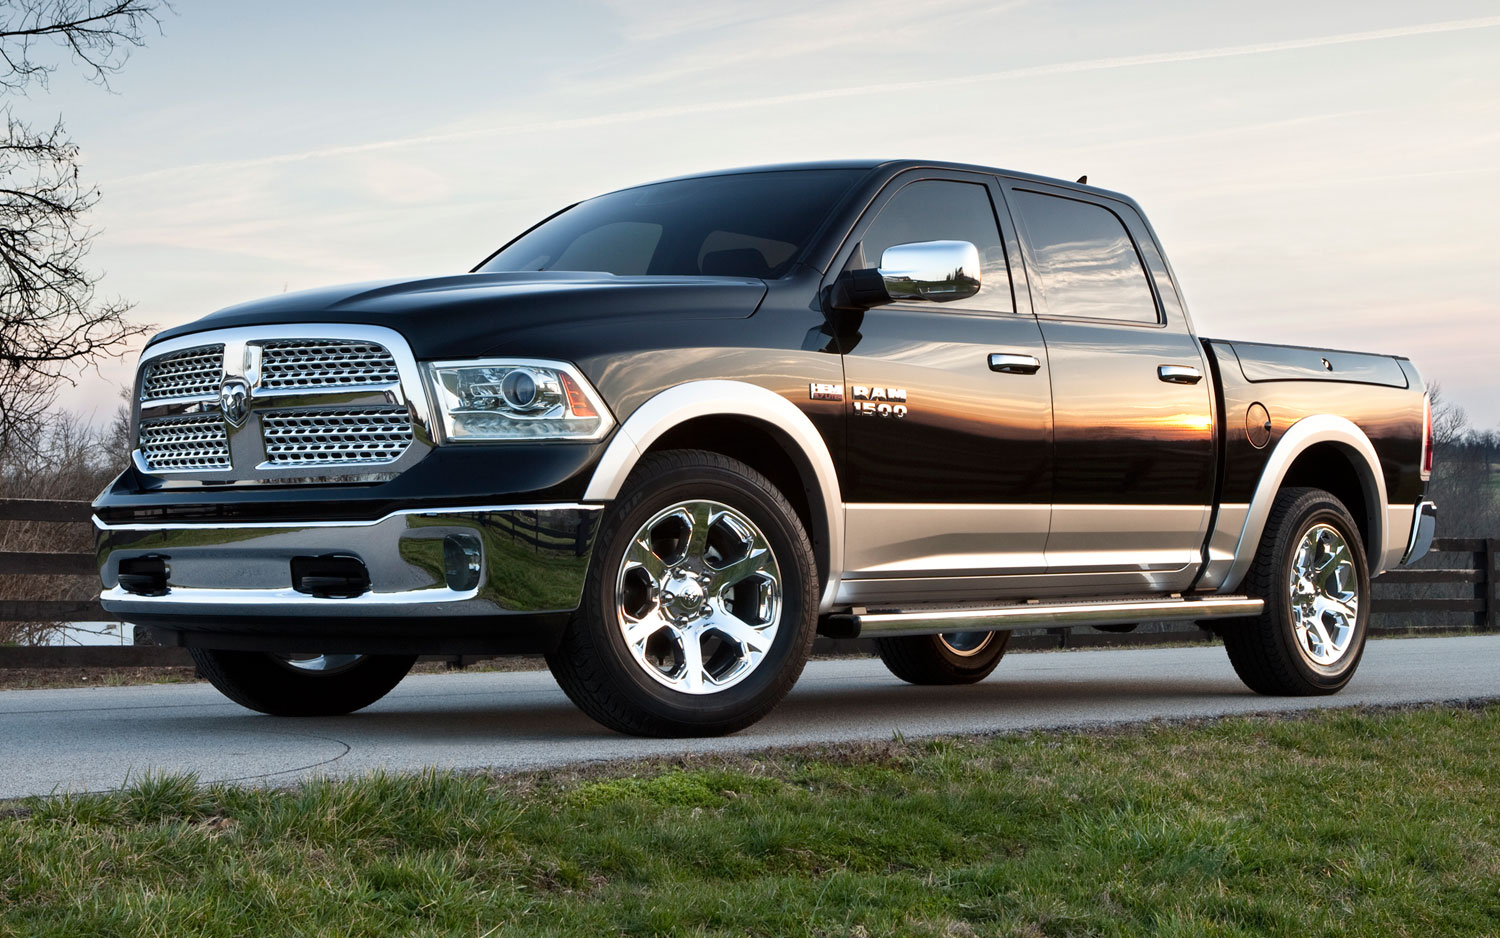 2013 Dodge Ram 1500 front side view